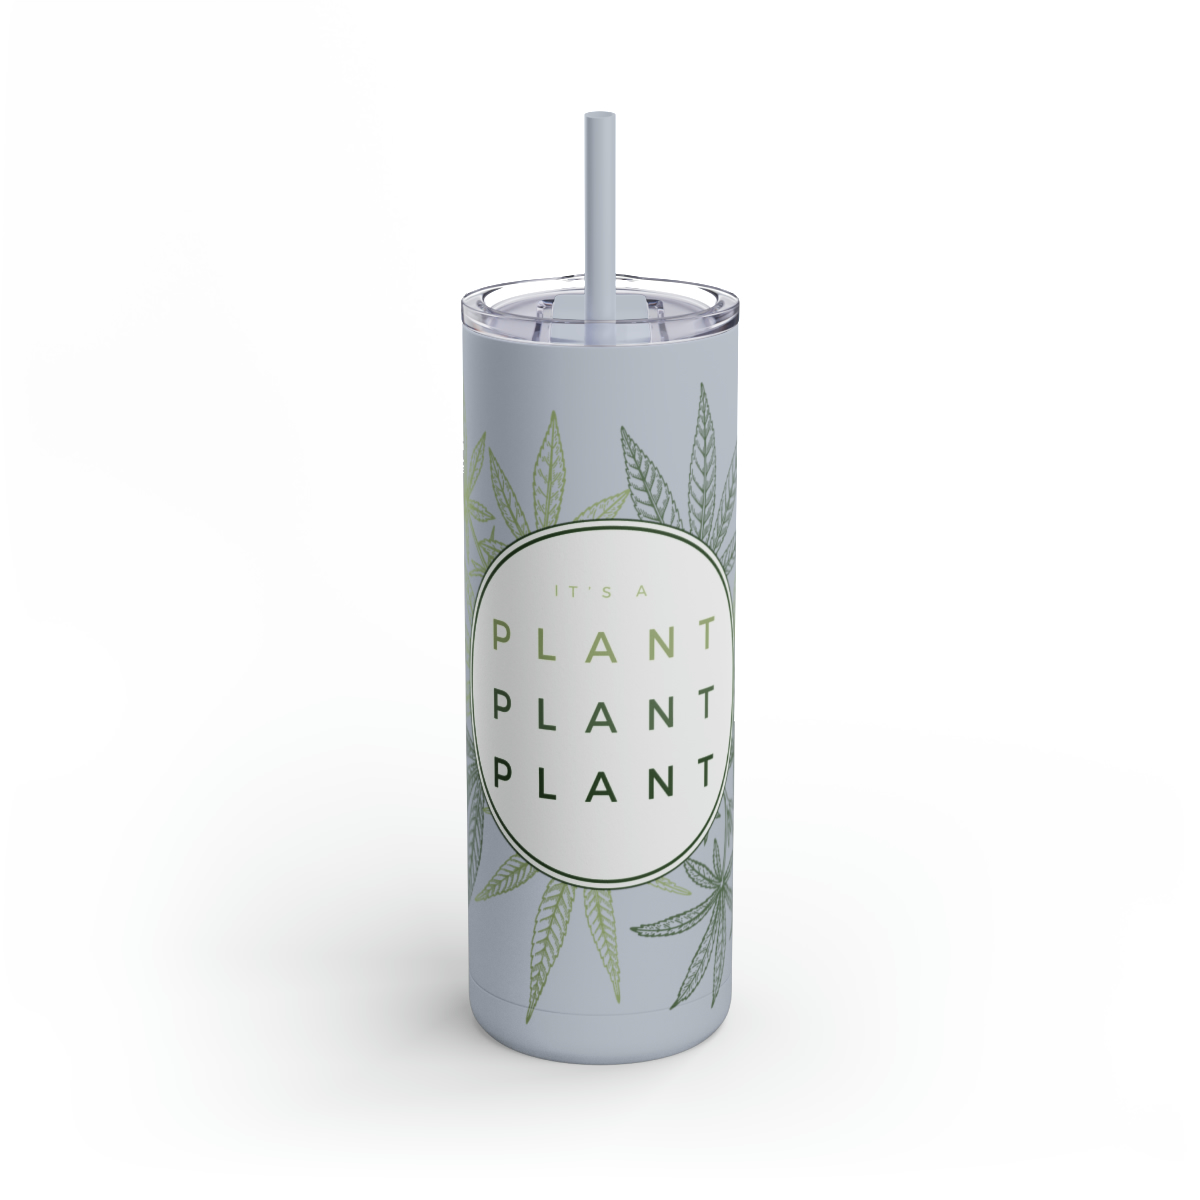 Dear Everybody, #ItsaPlant

🍃🌱💚

brainforest420.com for #stonergear Use code 420Free for FREE SHIPPING in April!✨